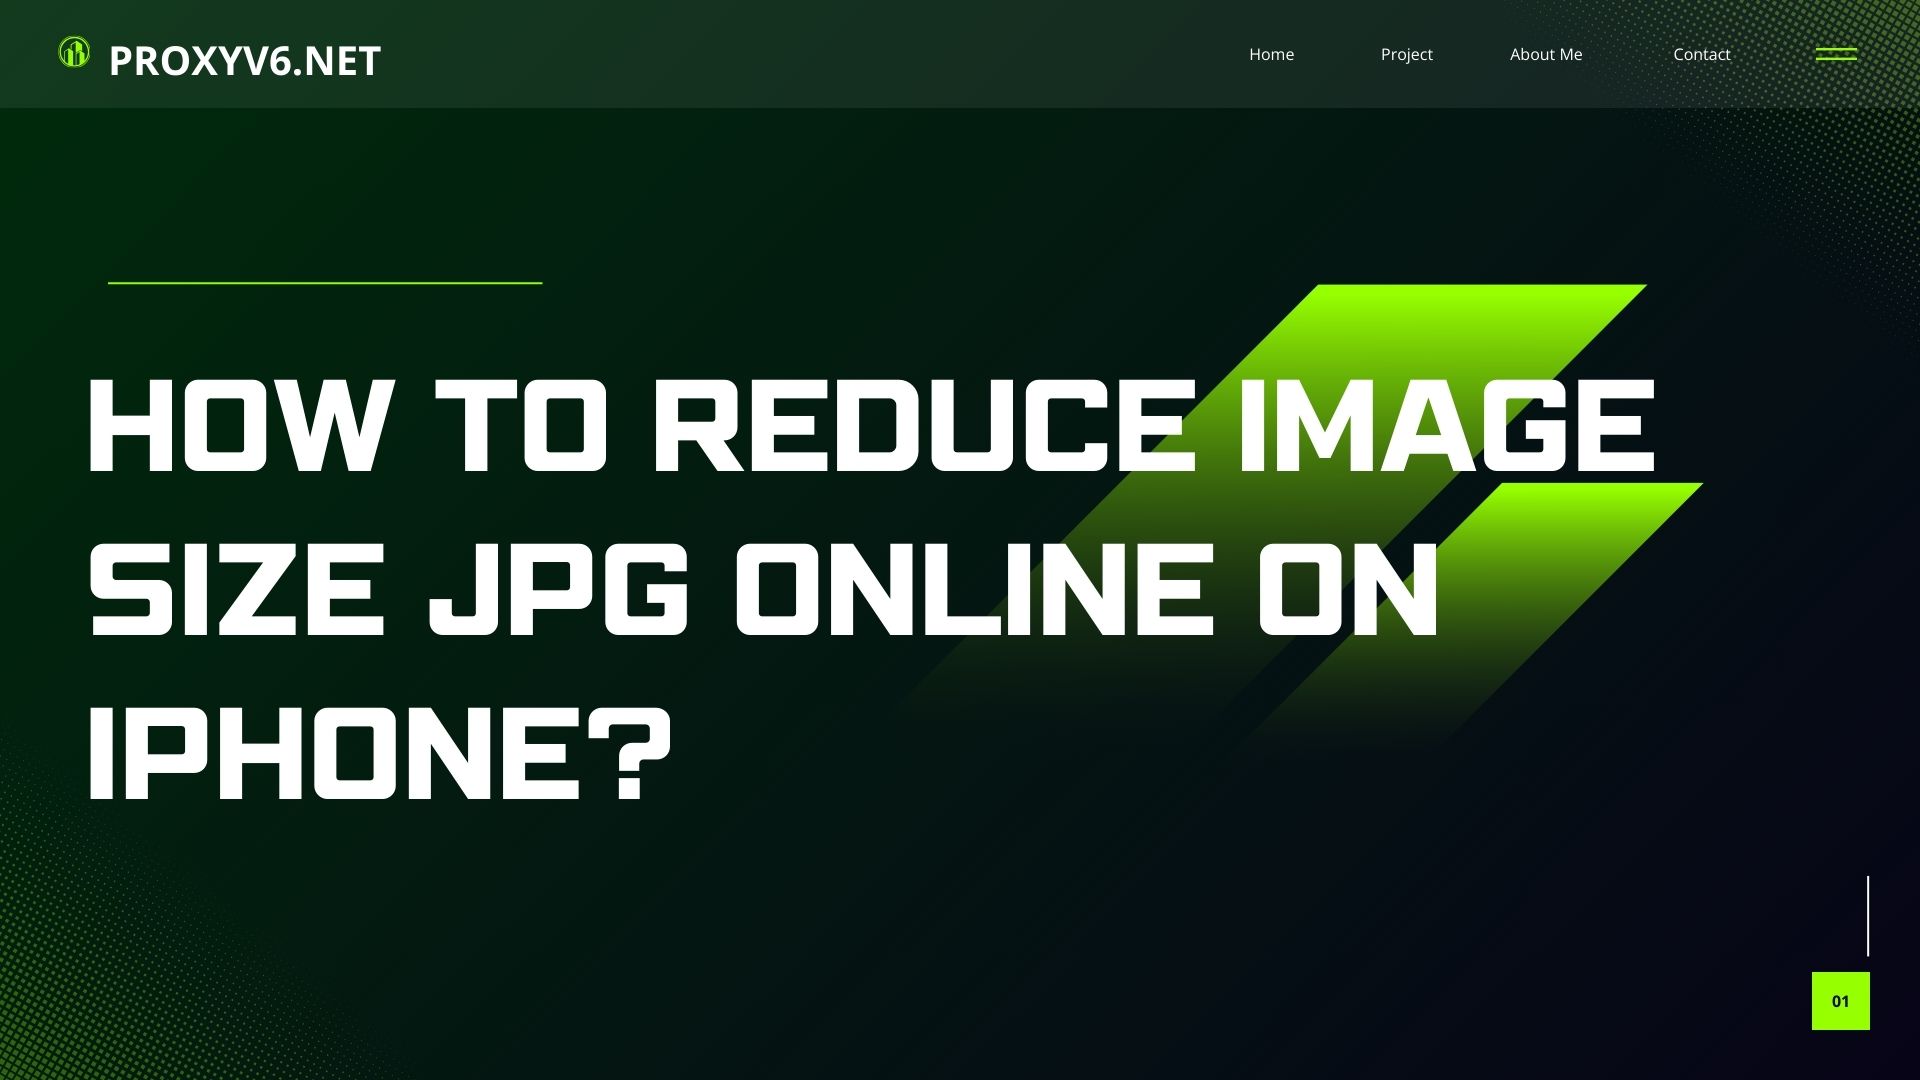 How to reduce image size JPG online on iPhone?